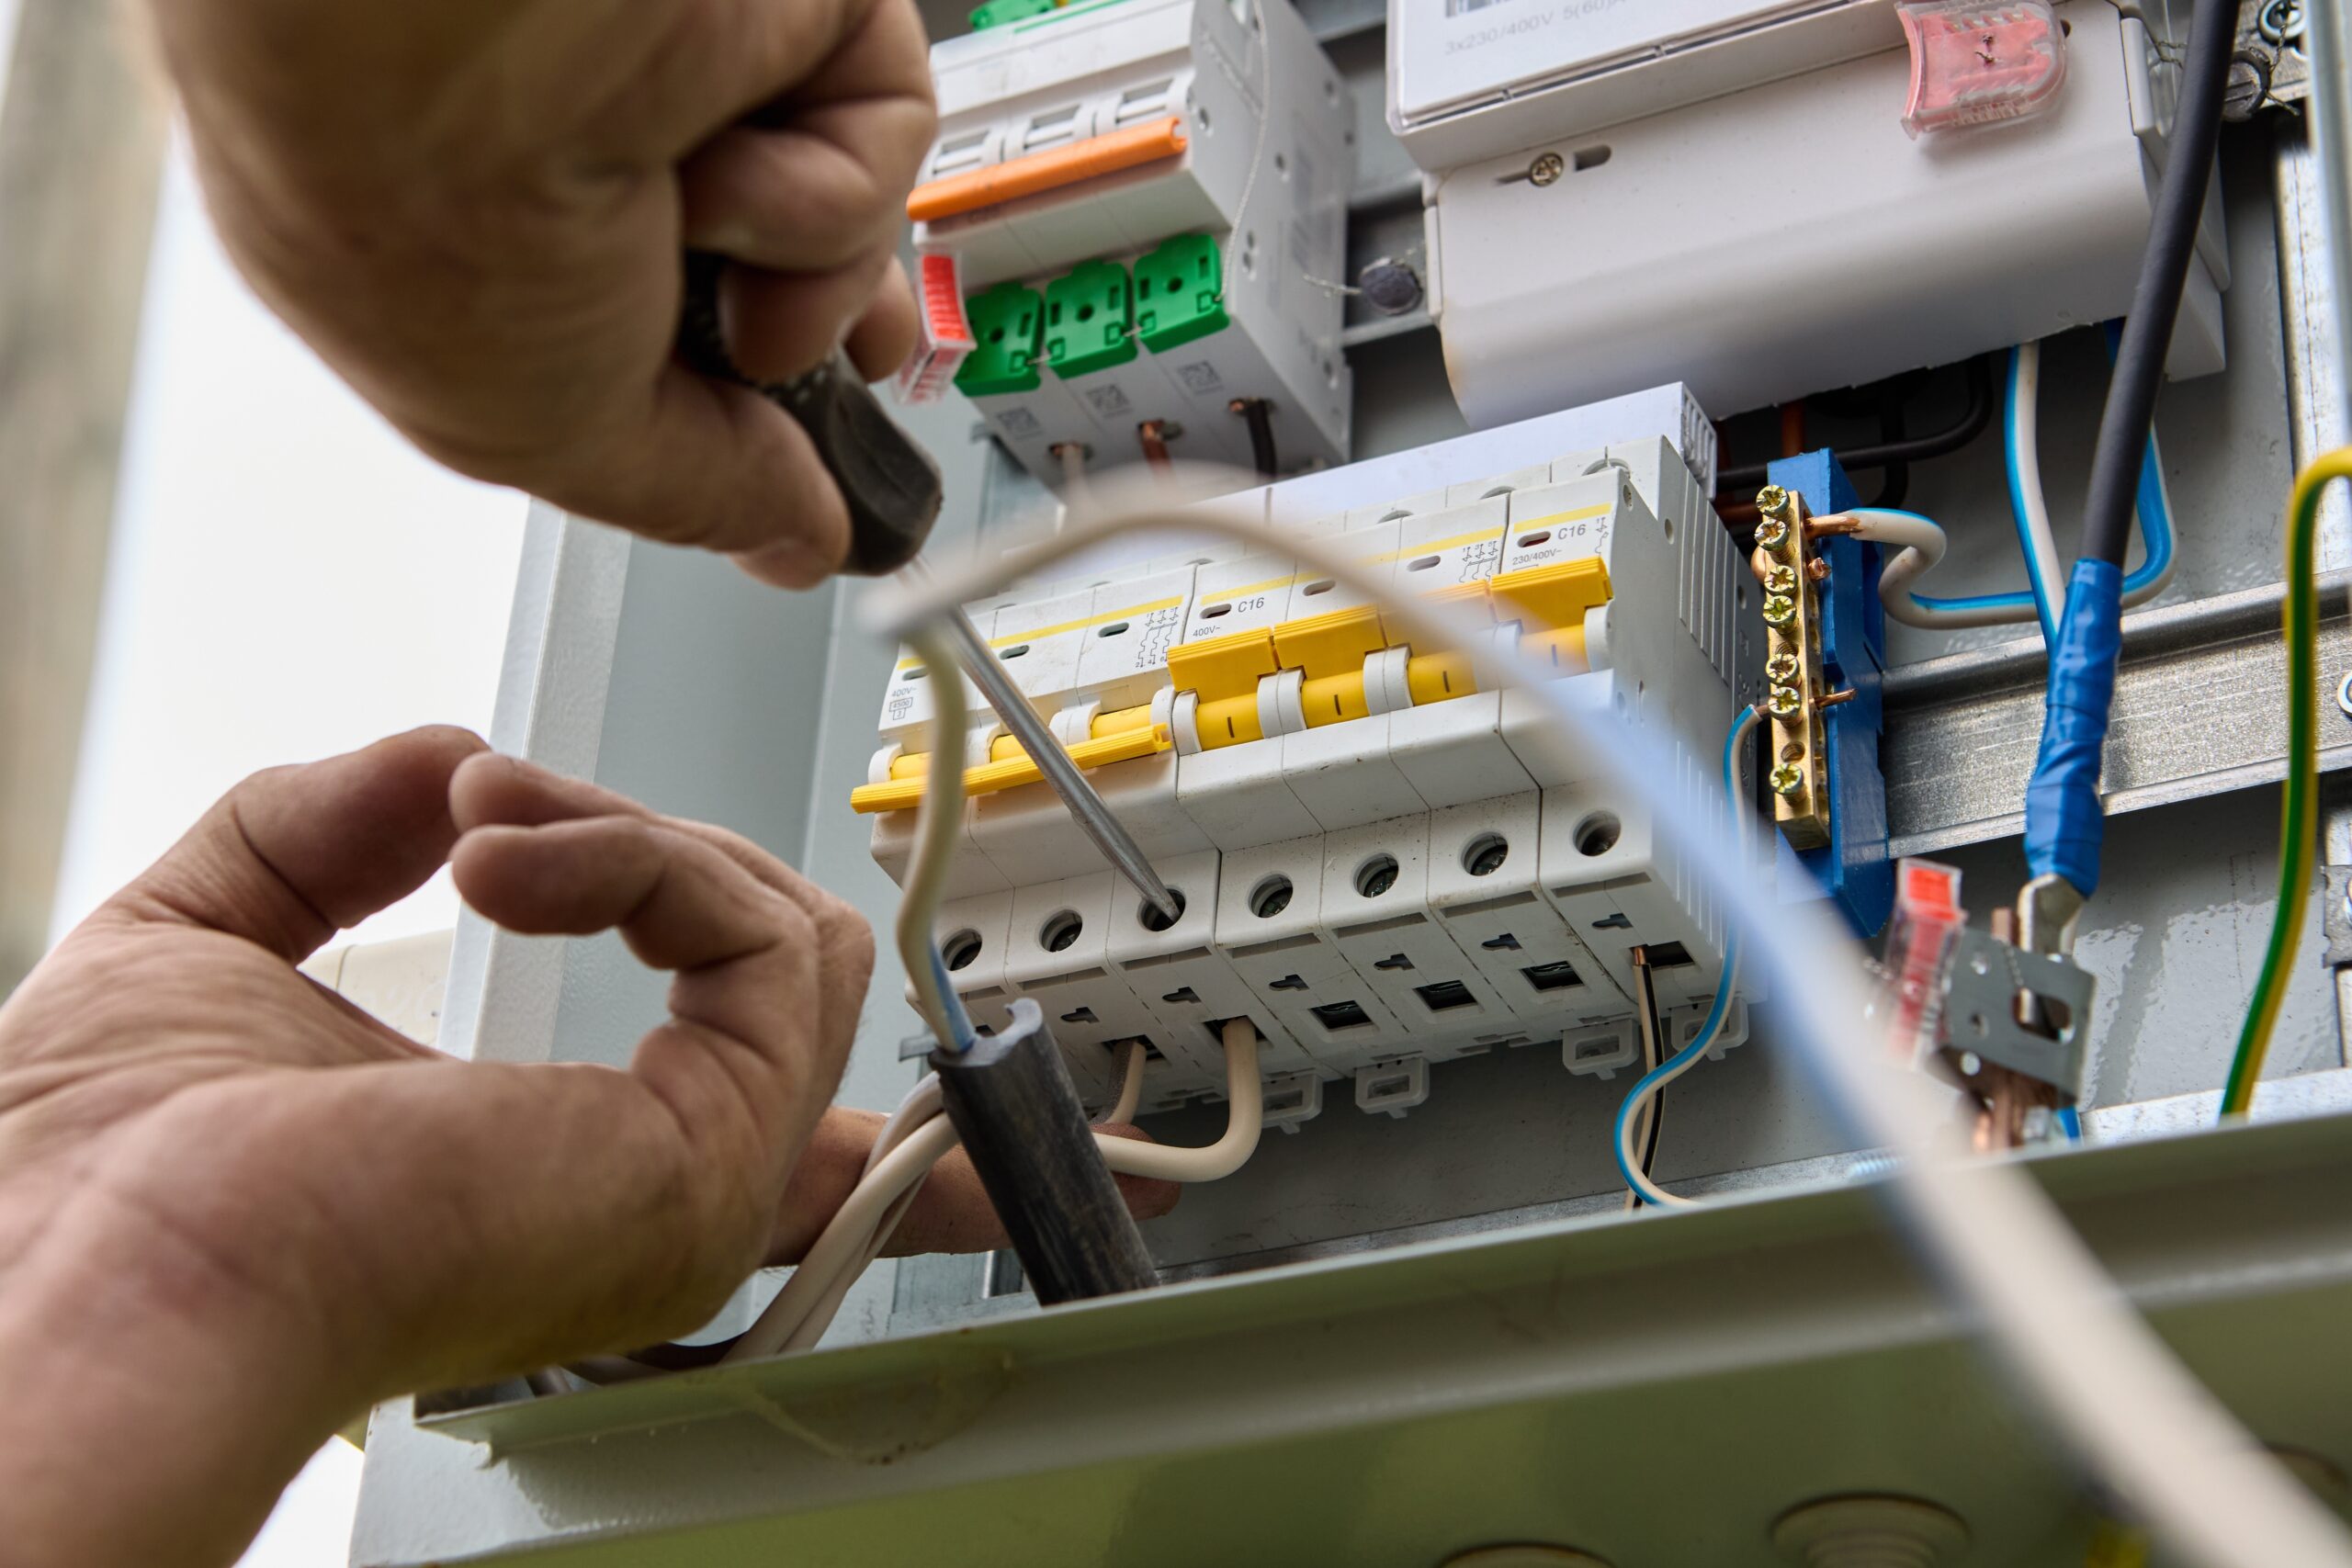 A contractor upgrading an electrical panel